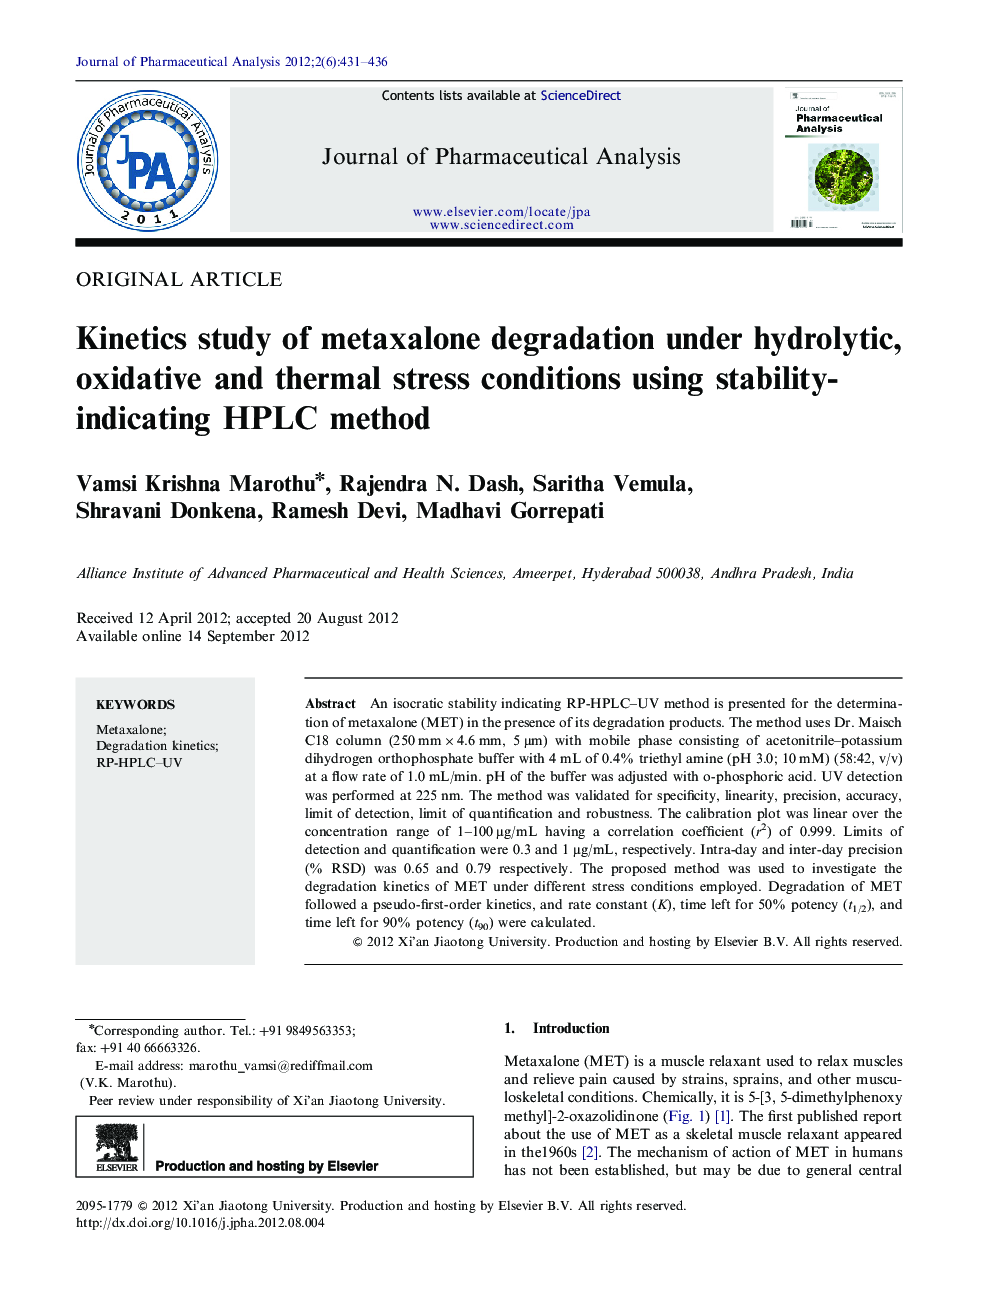 Kinetics study of metaxalone degradation under hydrolytic, oxidative and thermal stress conditions using stability-indicating HPLC method 